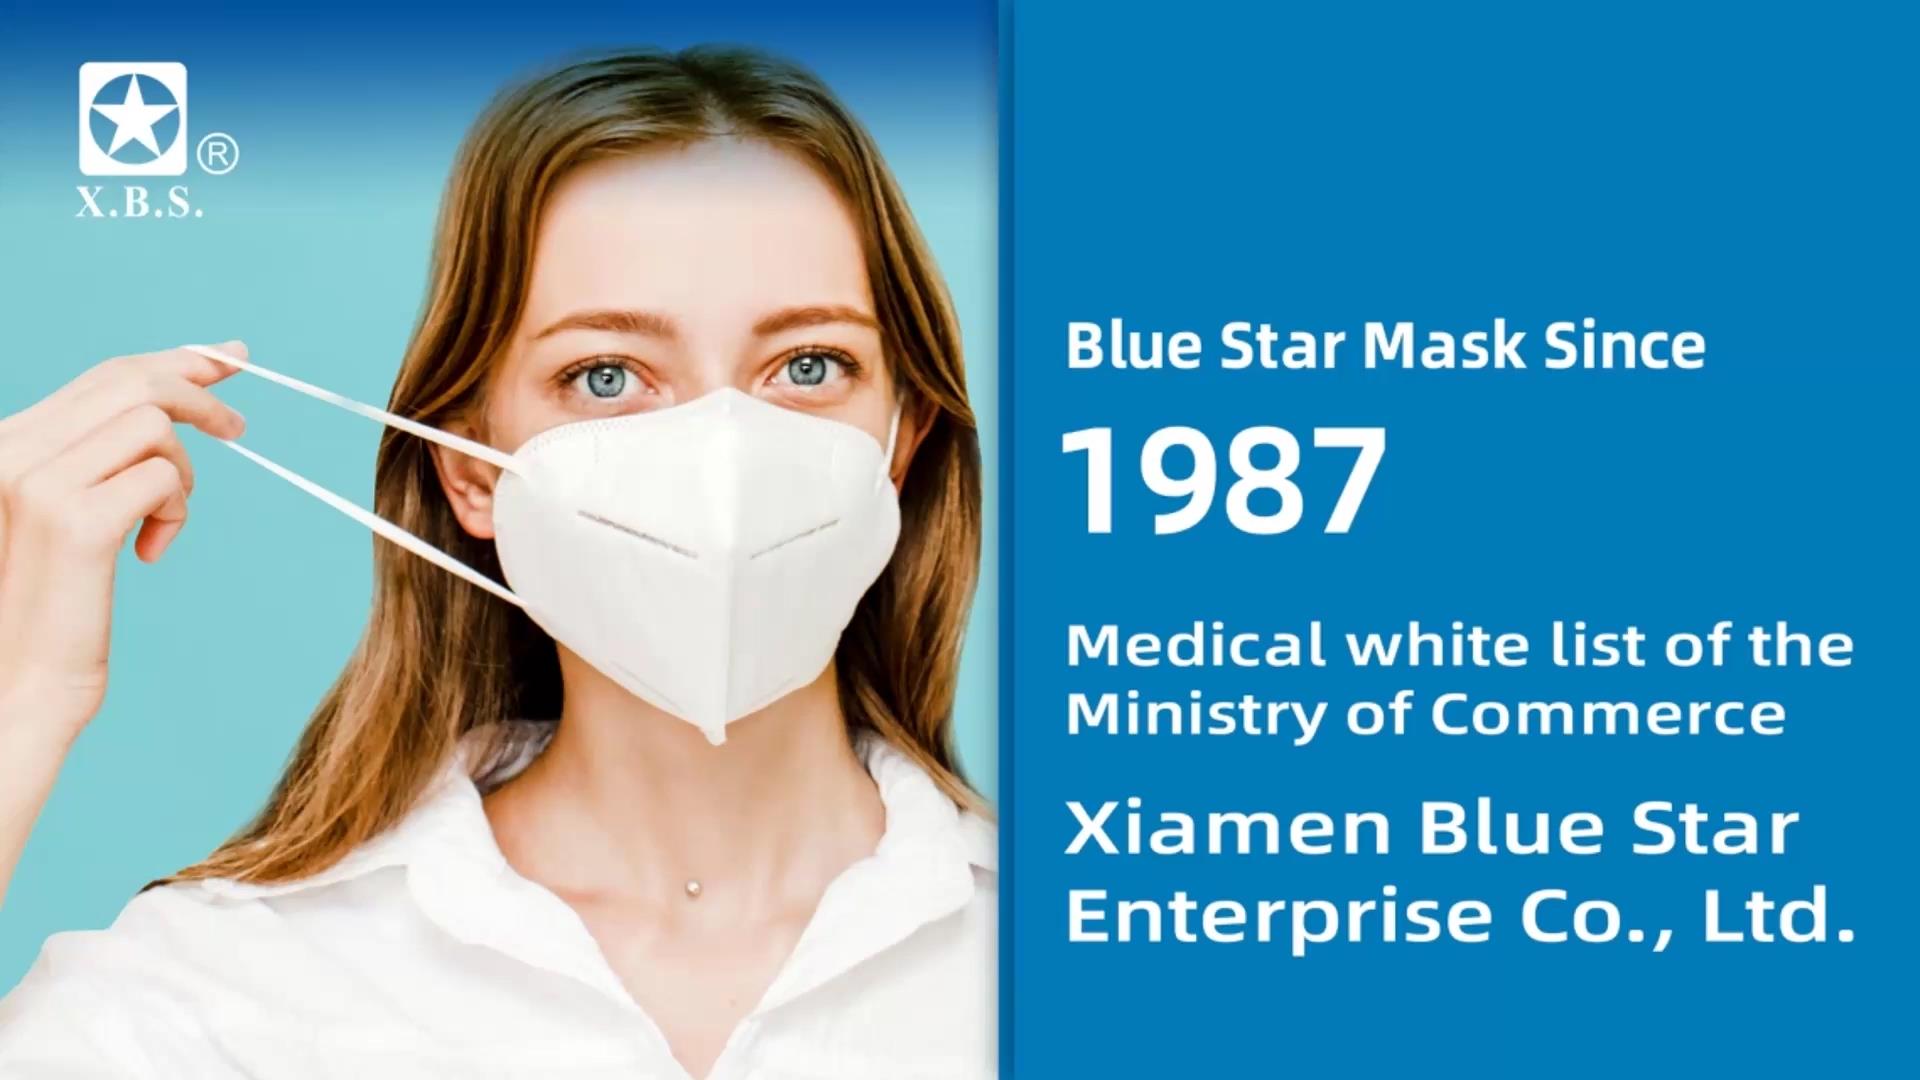 Bluestar Enterprise and Product Introduction